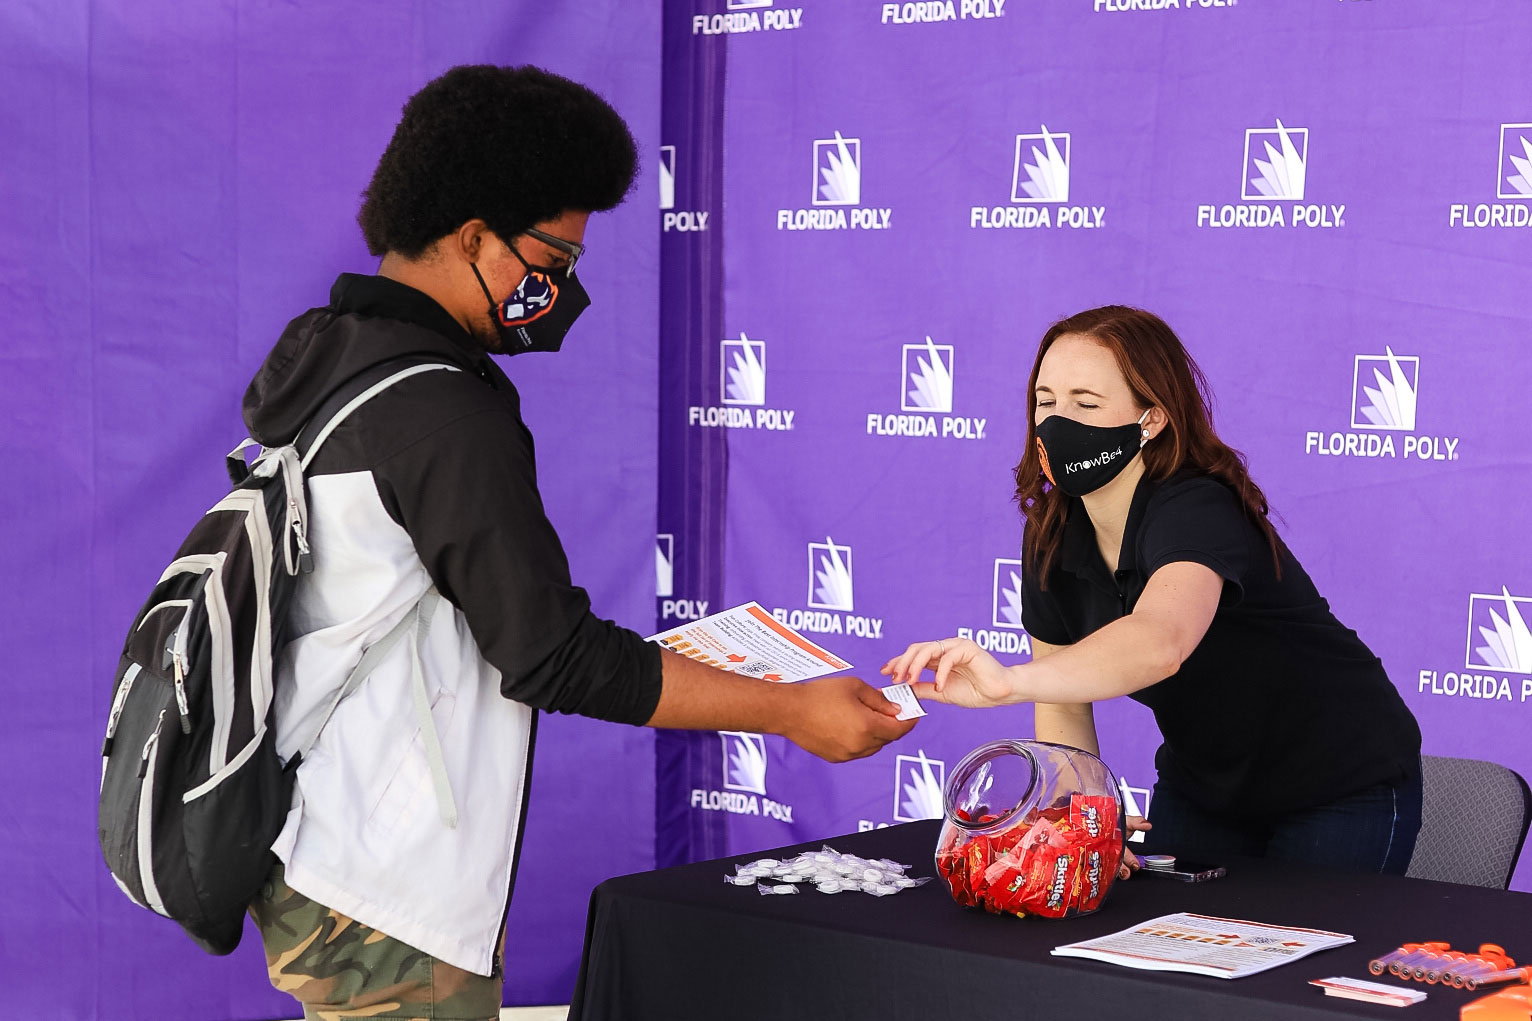 A Florida Polytechnic University student receives informational material from a representative of cybersecurity company KnowBe4 during the company’s sponsored day on campus.